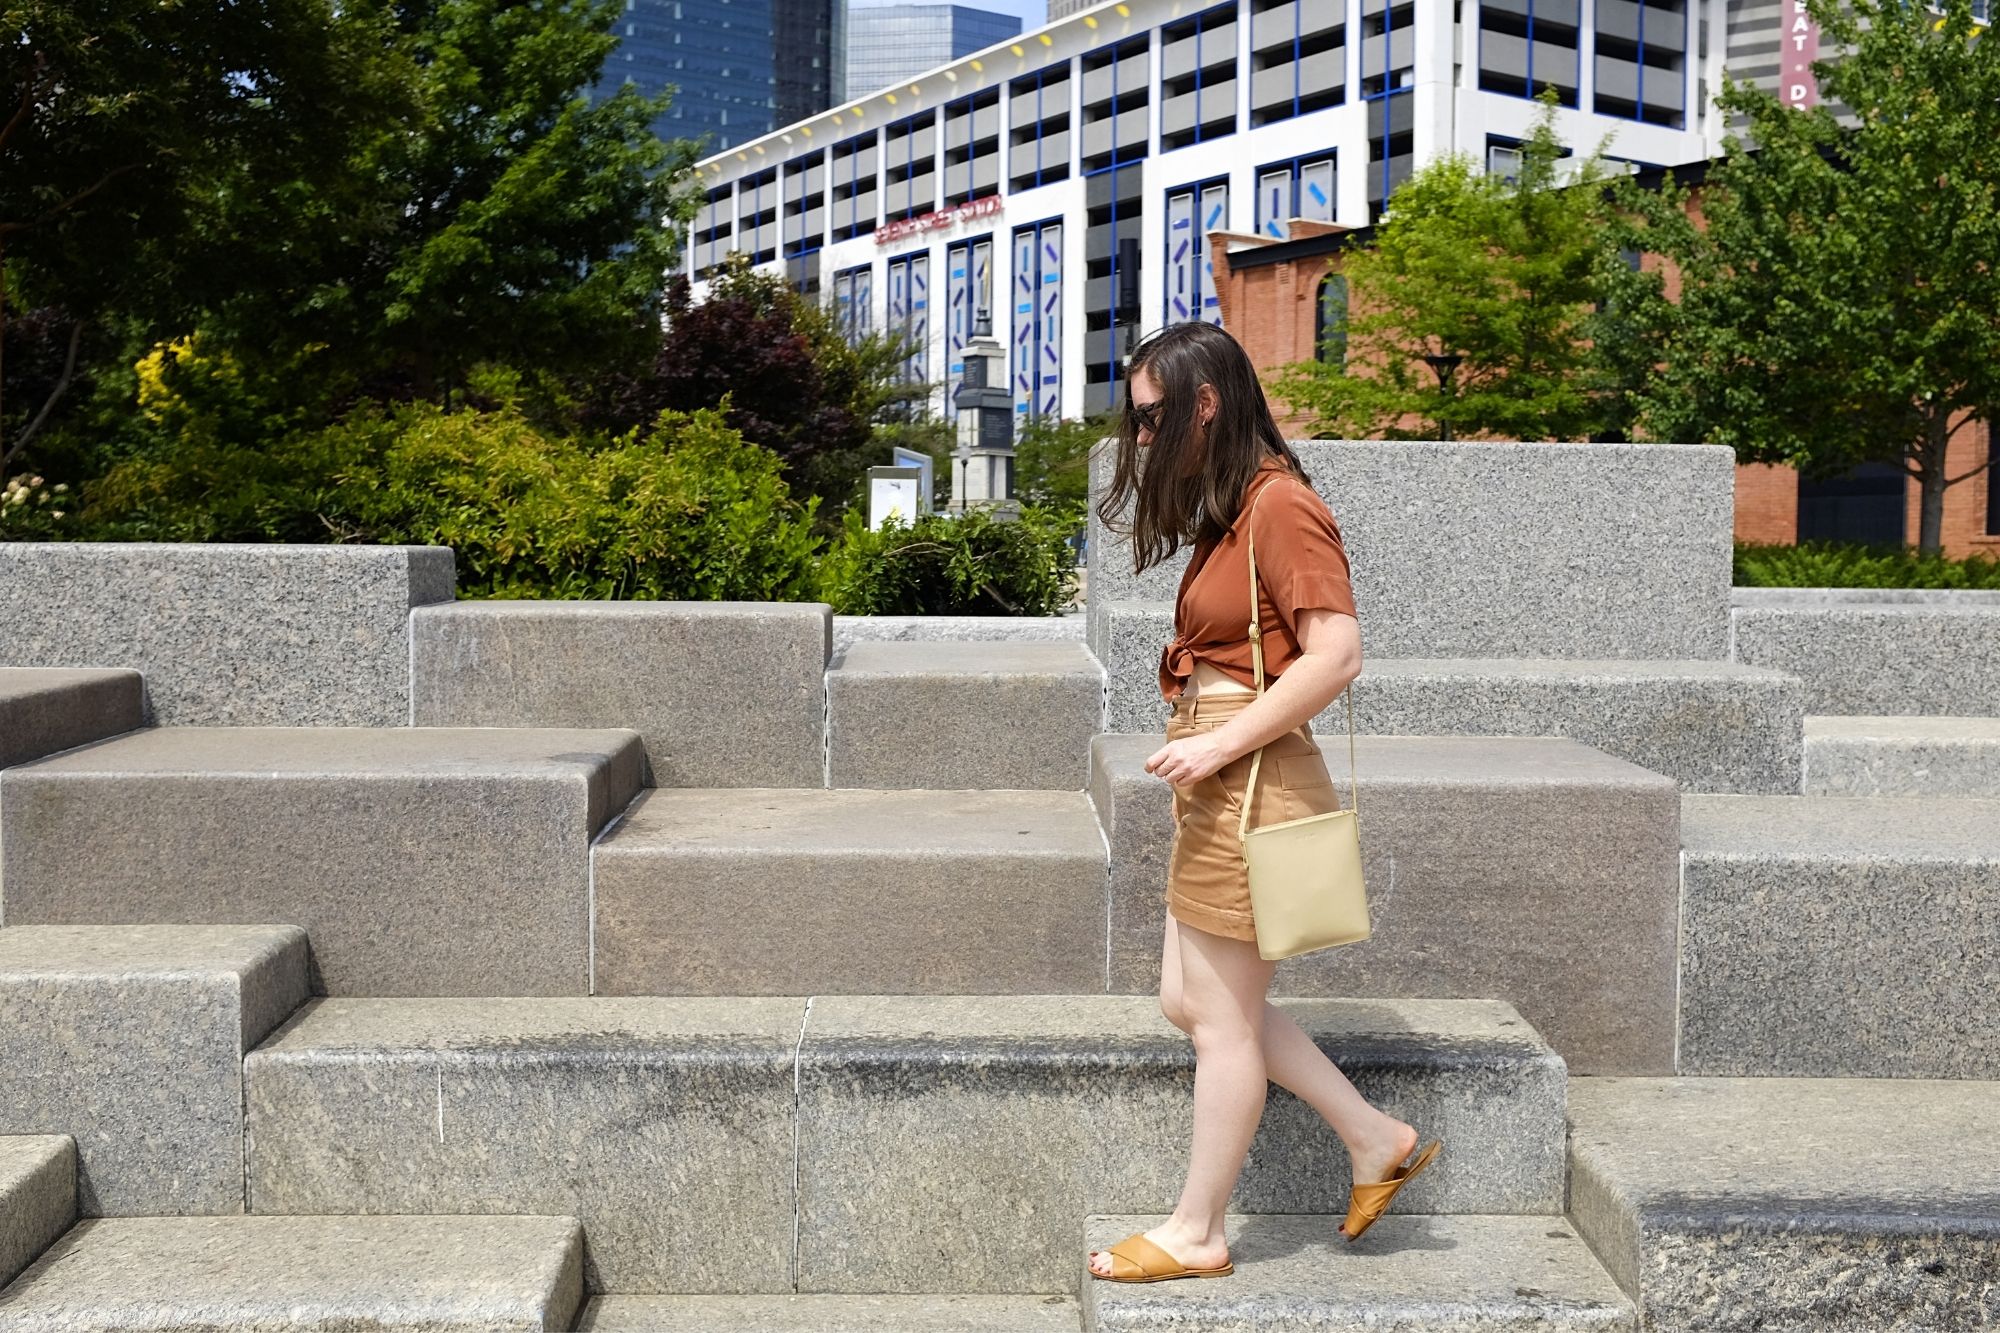 Alyssa walks on stone steps and is wearing the clean silk square shirt and the way high shorts